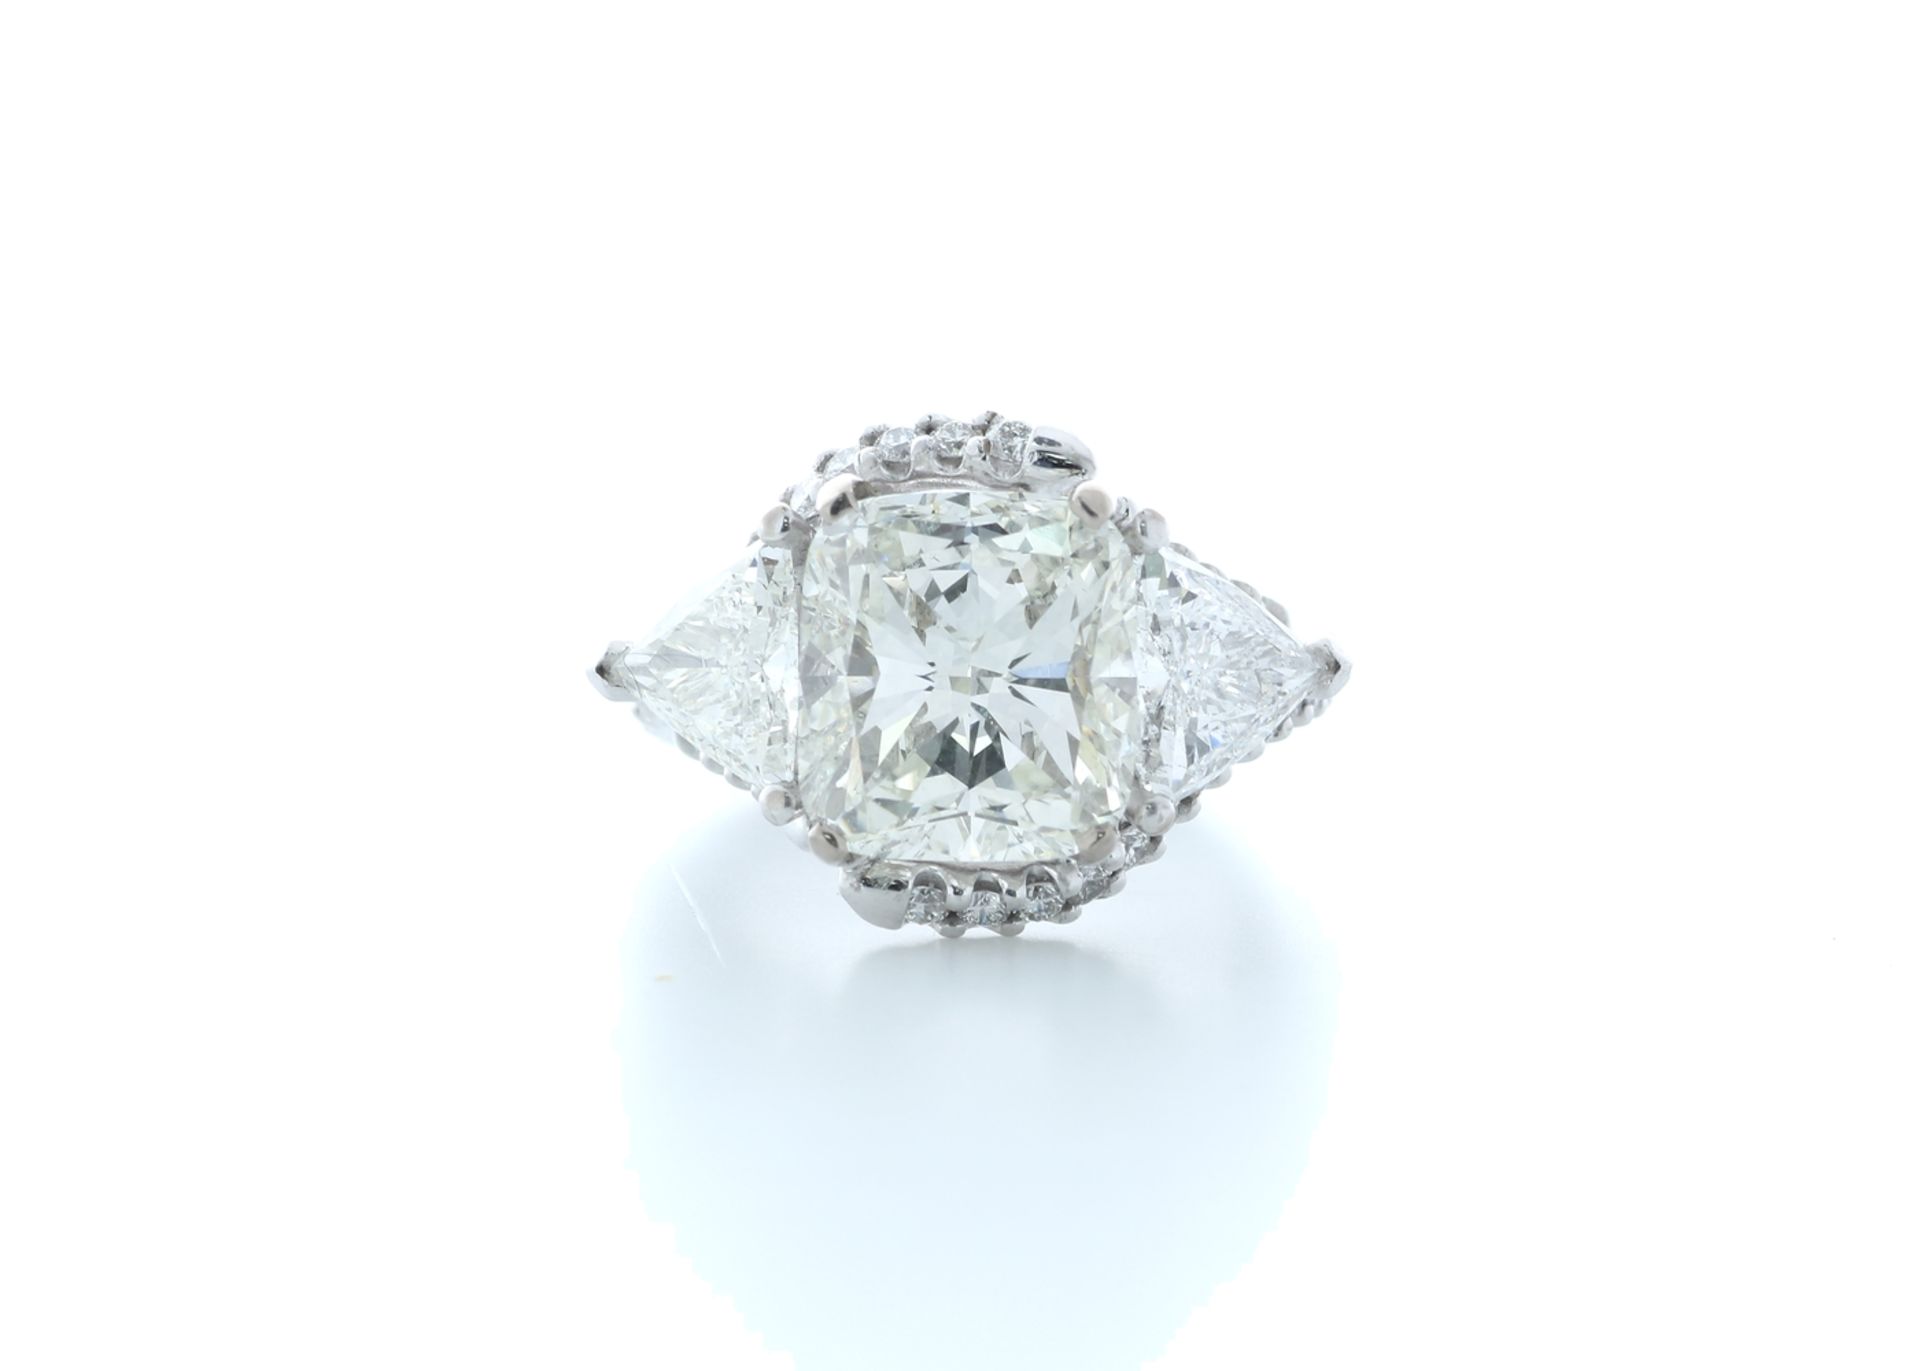 18ct White Gold Cushion Diamond Ring 7.03 (4.51) Carats - Valued by IDI £265,500.00 - 18ct White